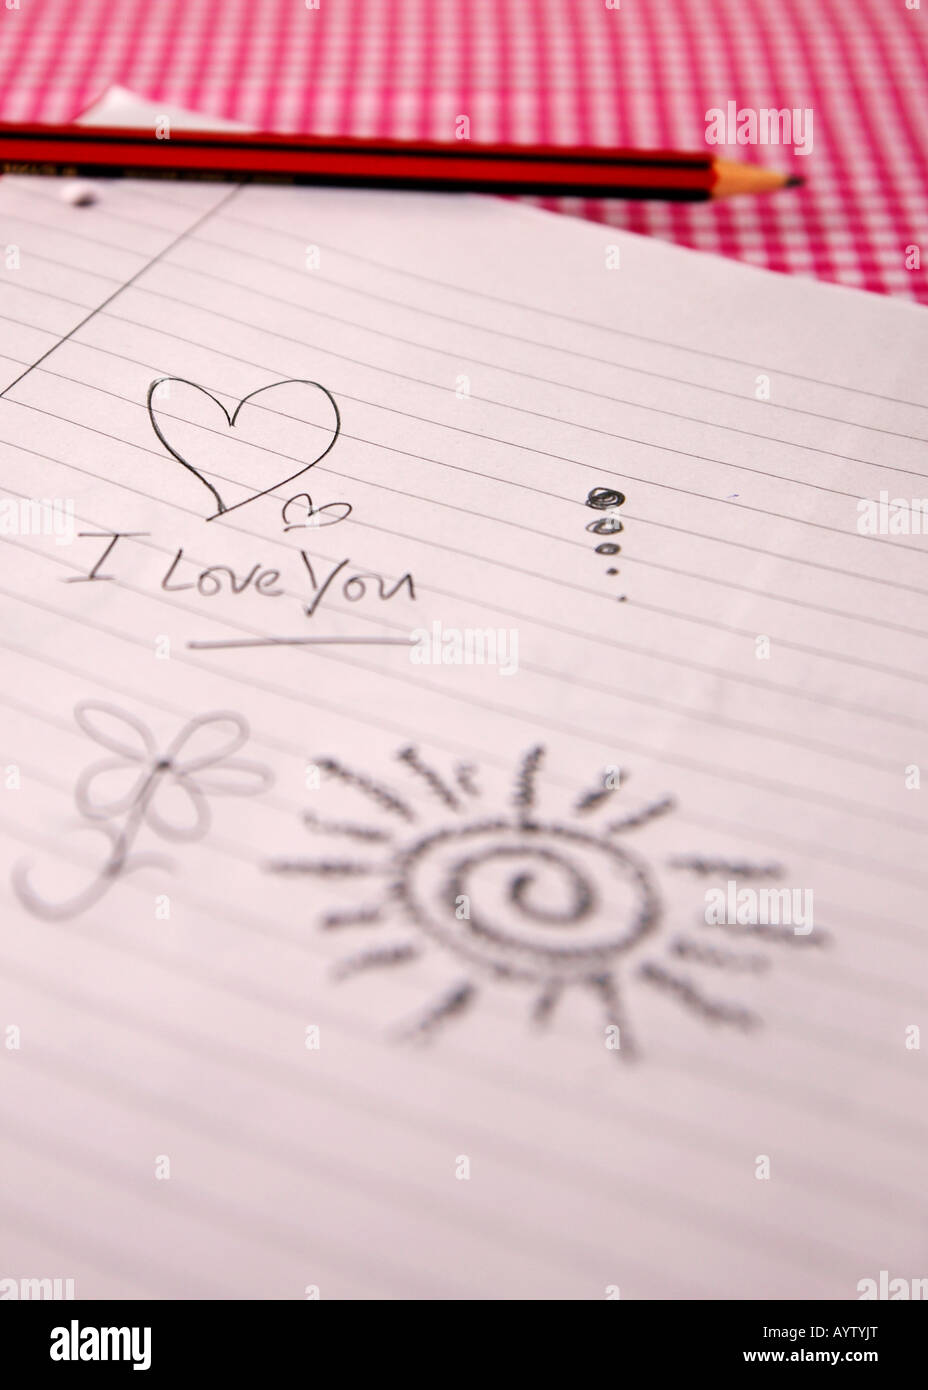 I Love You Doodle on a lined pad, with pencil Stock Photo